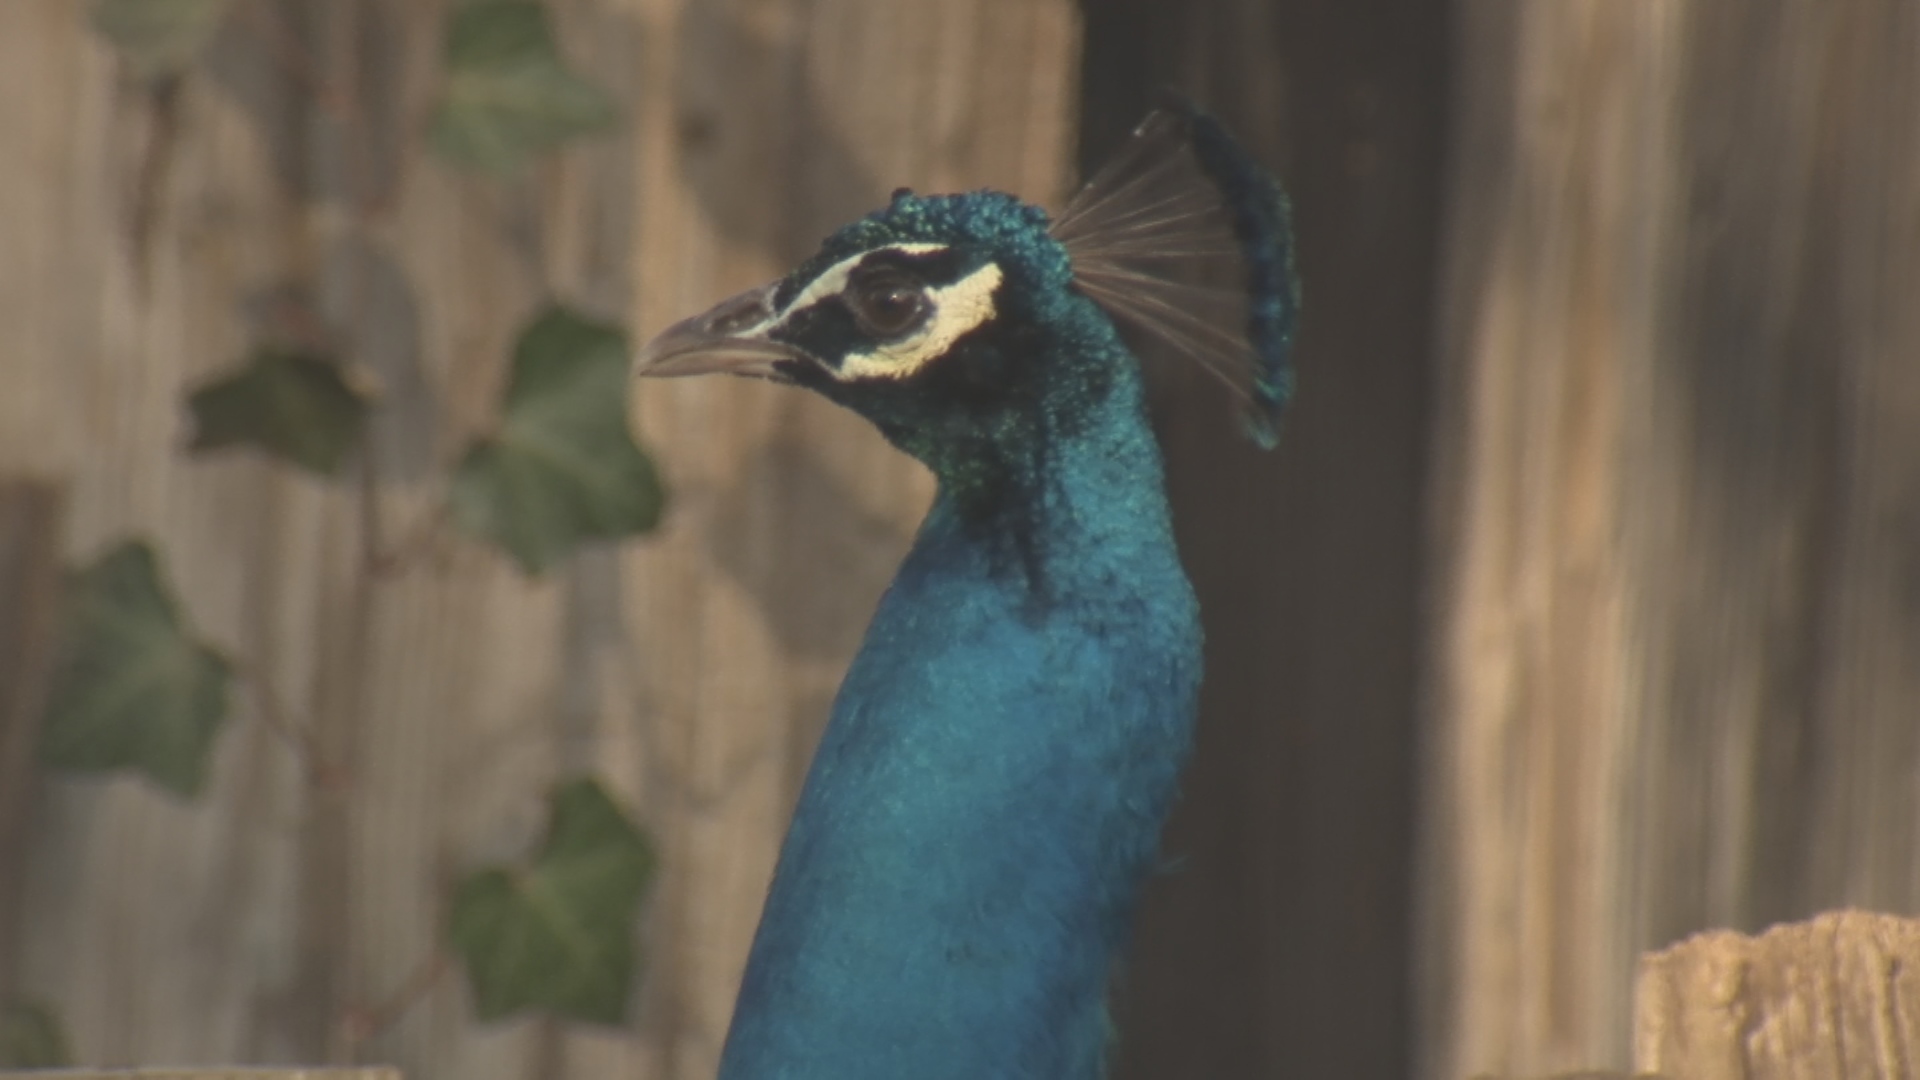 They're Back: Free-Roaming Peacocks Back On Tulsa Zoo Grounds